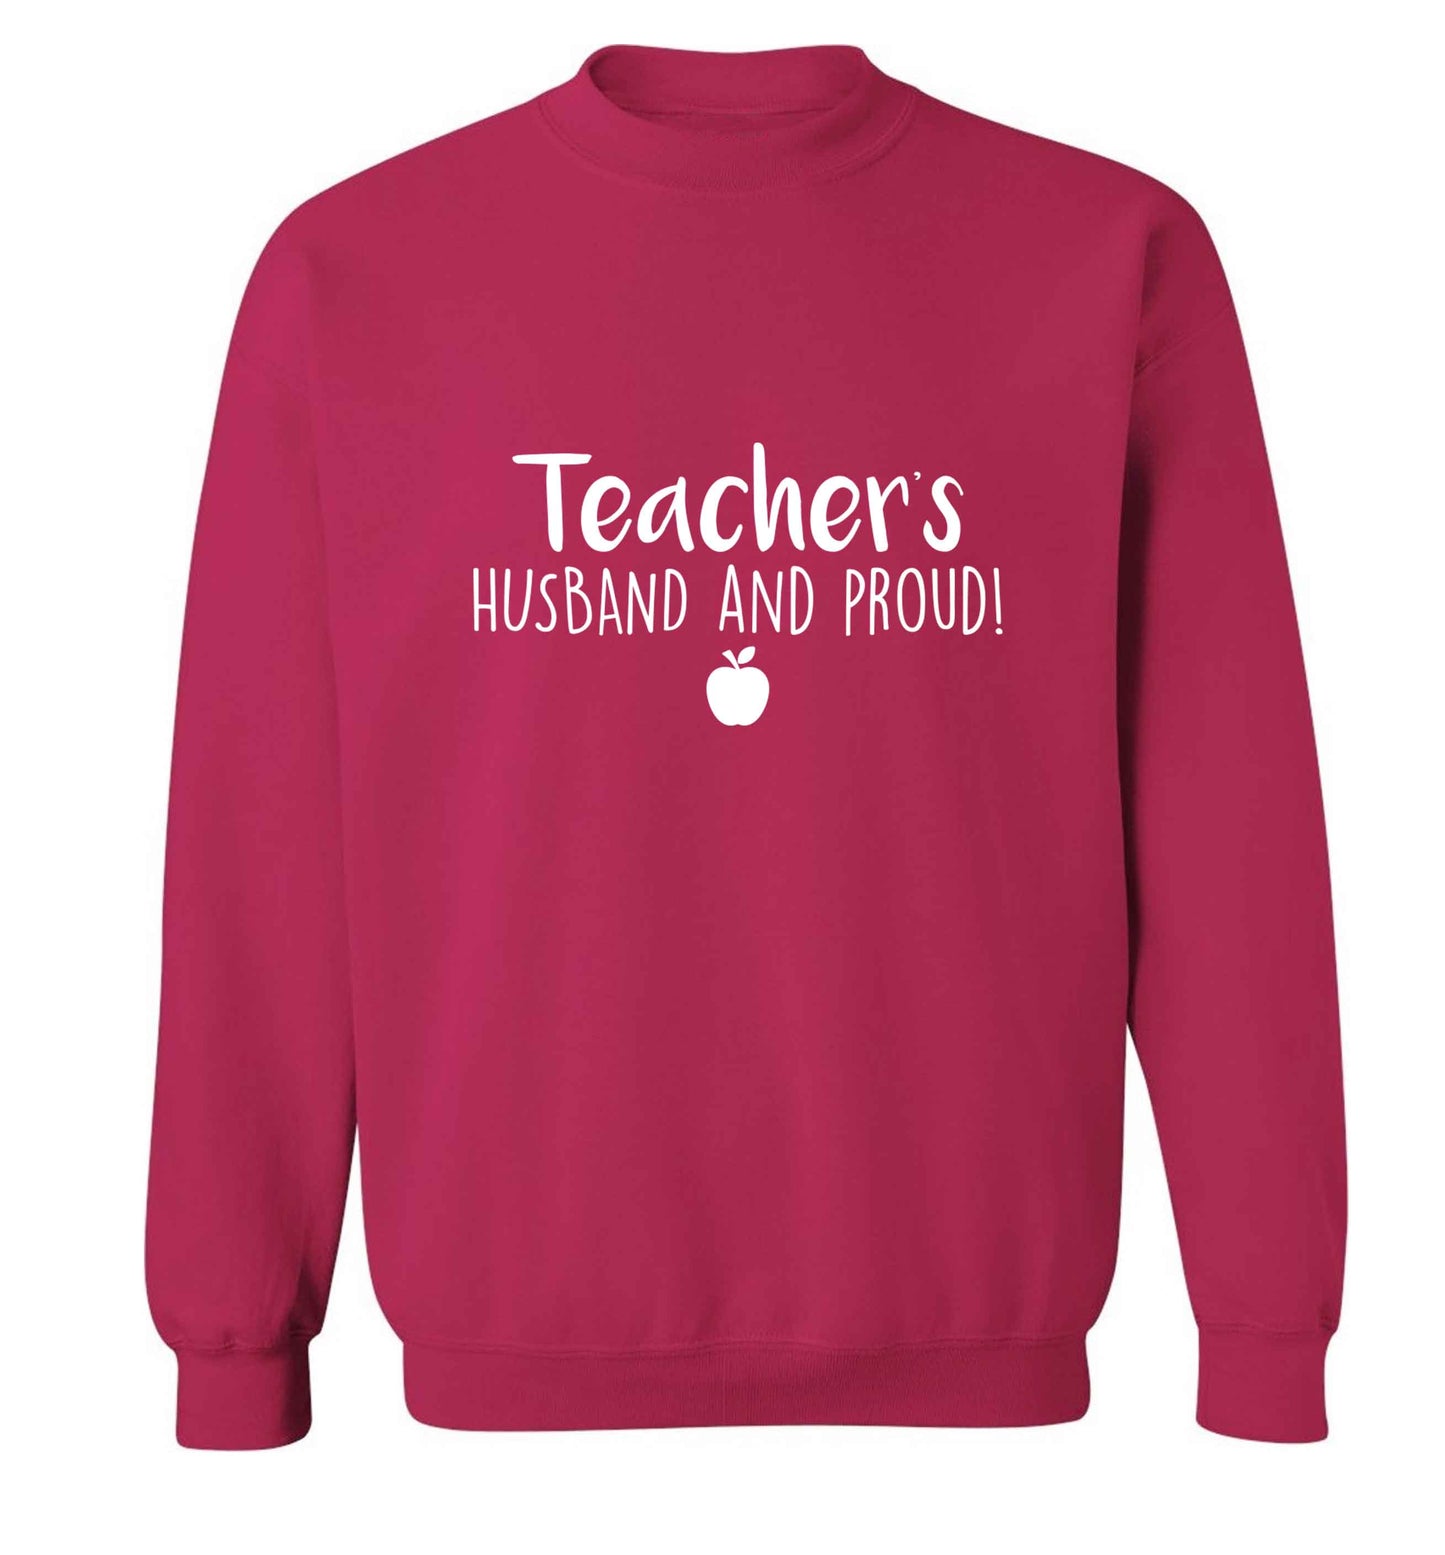 Teachers husband and proud adult's unisex pink sweater 2XL